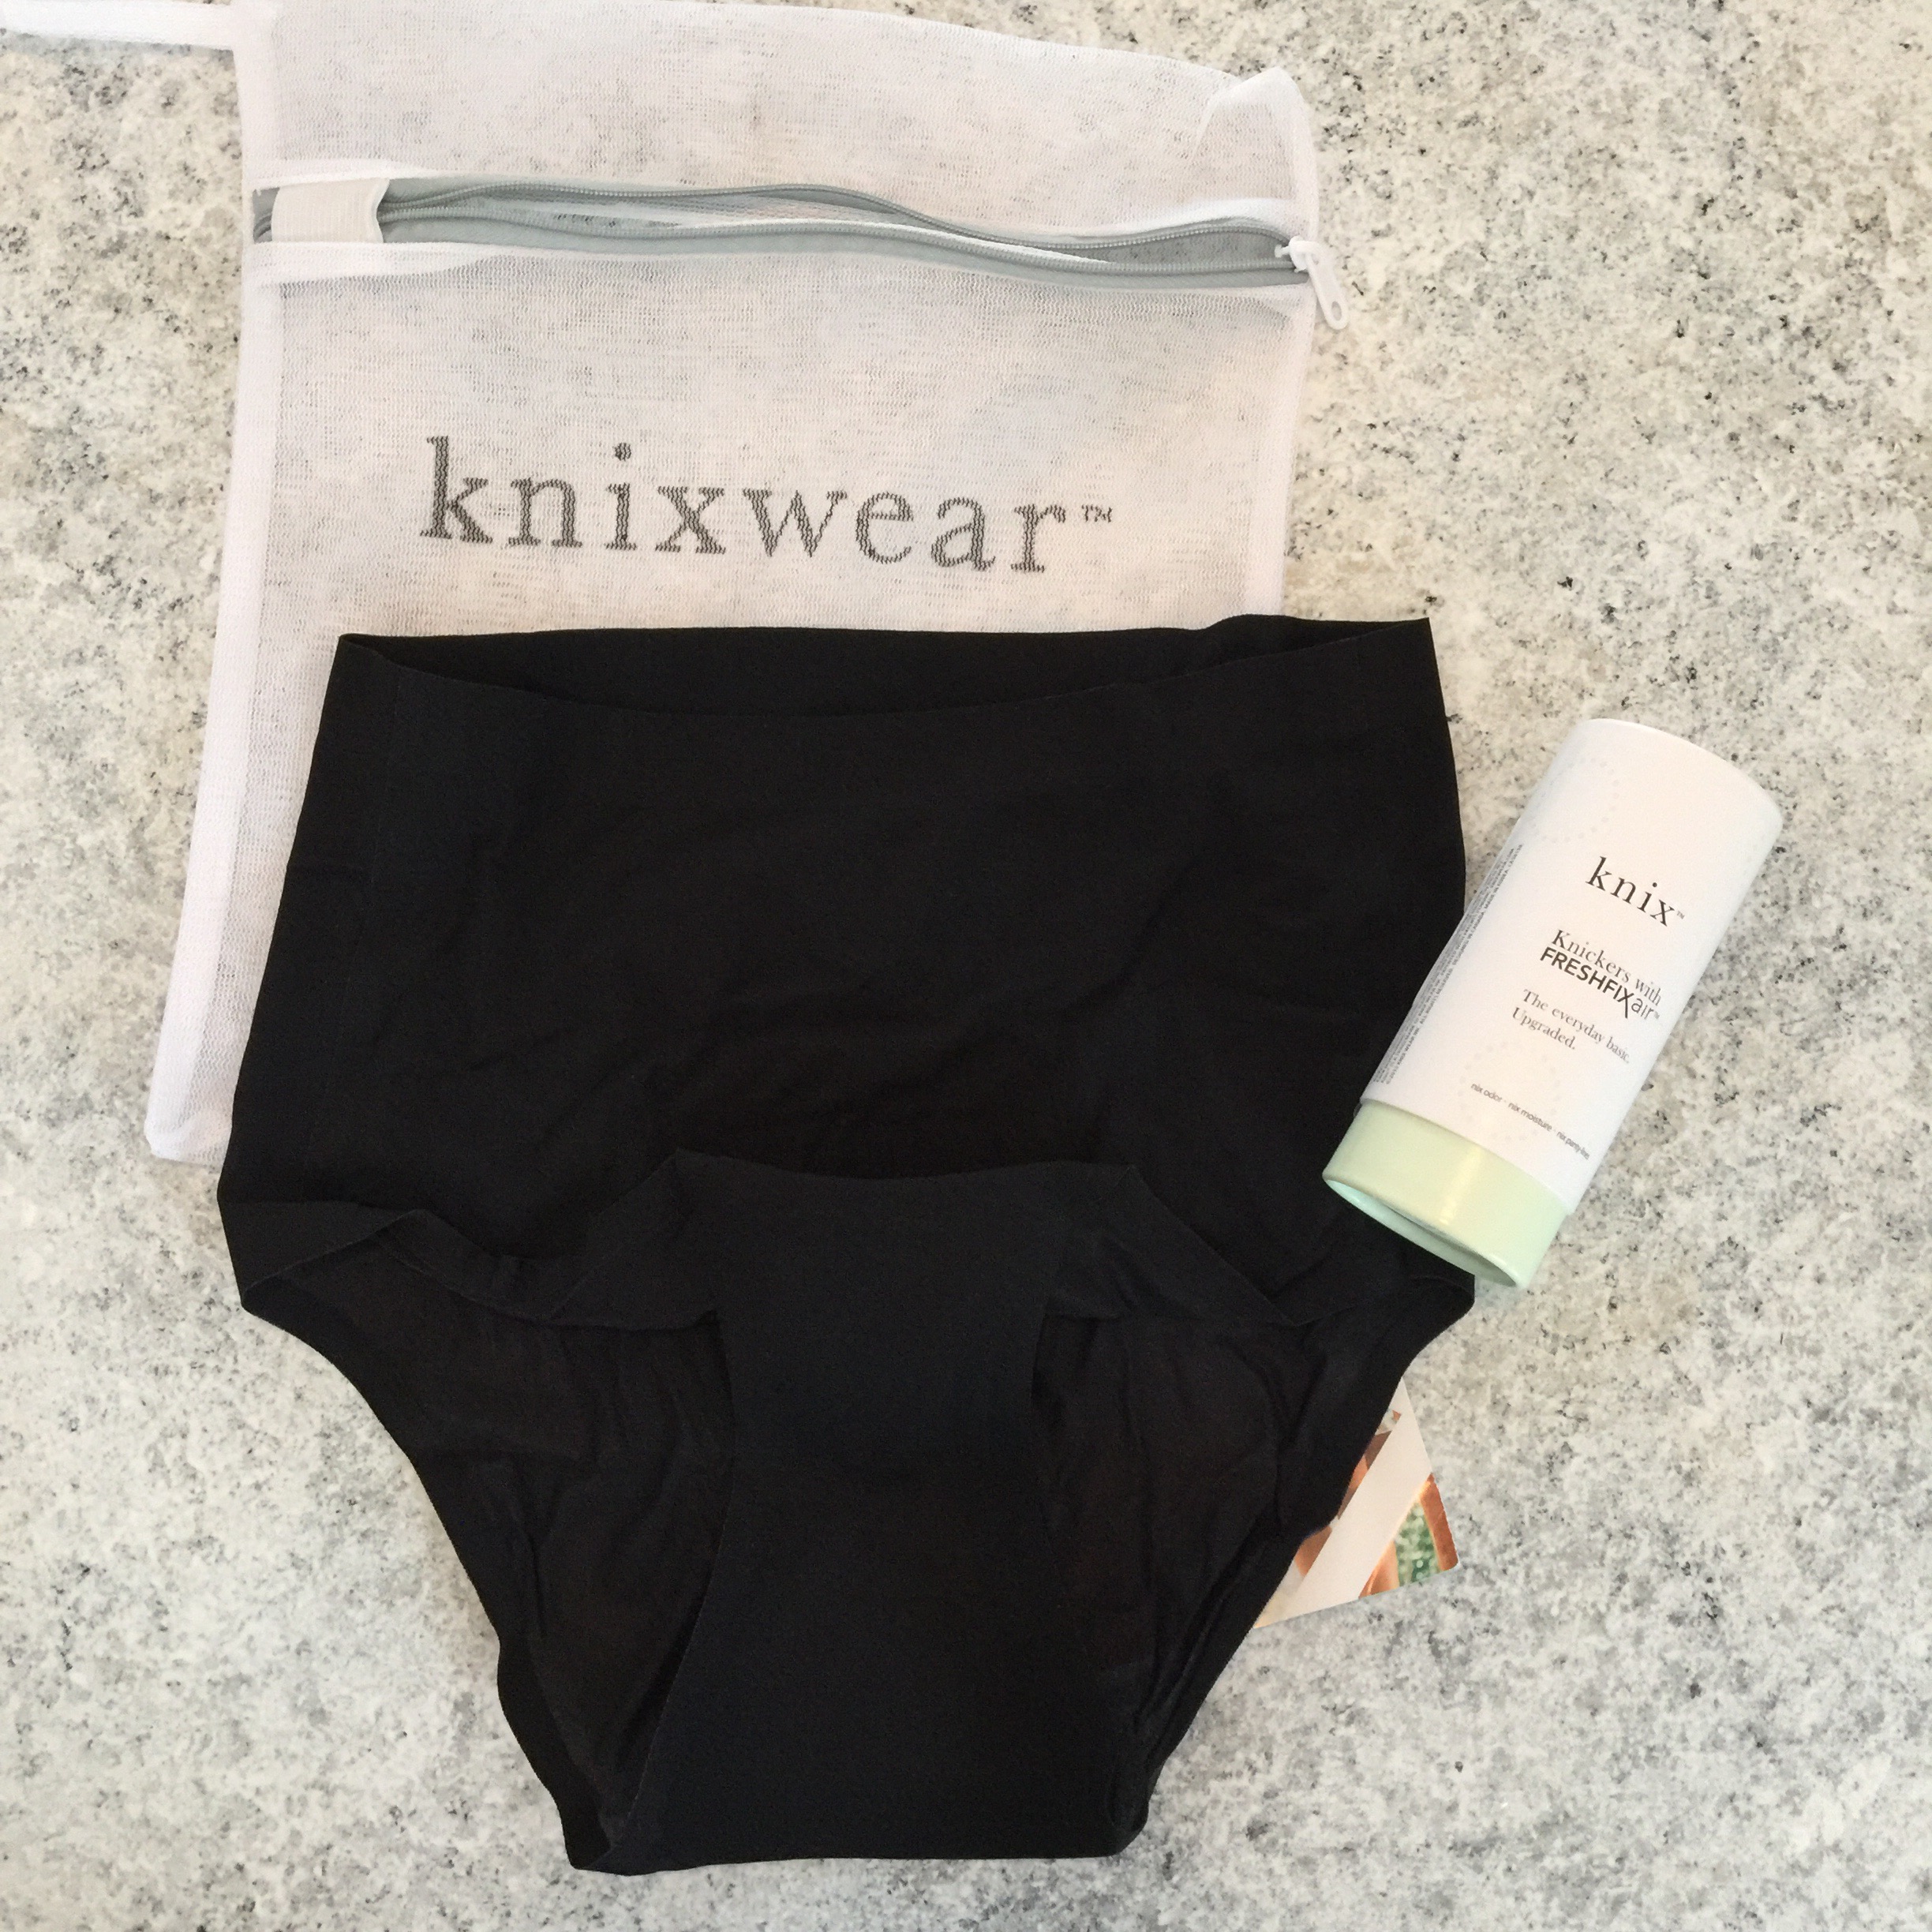 Knixwear FitKnix Athletic Leak Proof Thong & Reviews